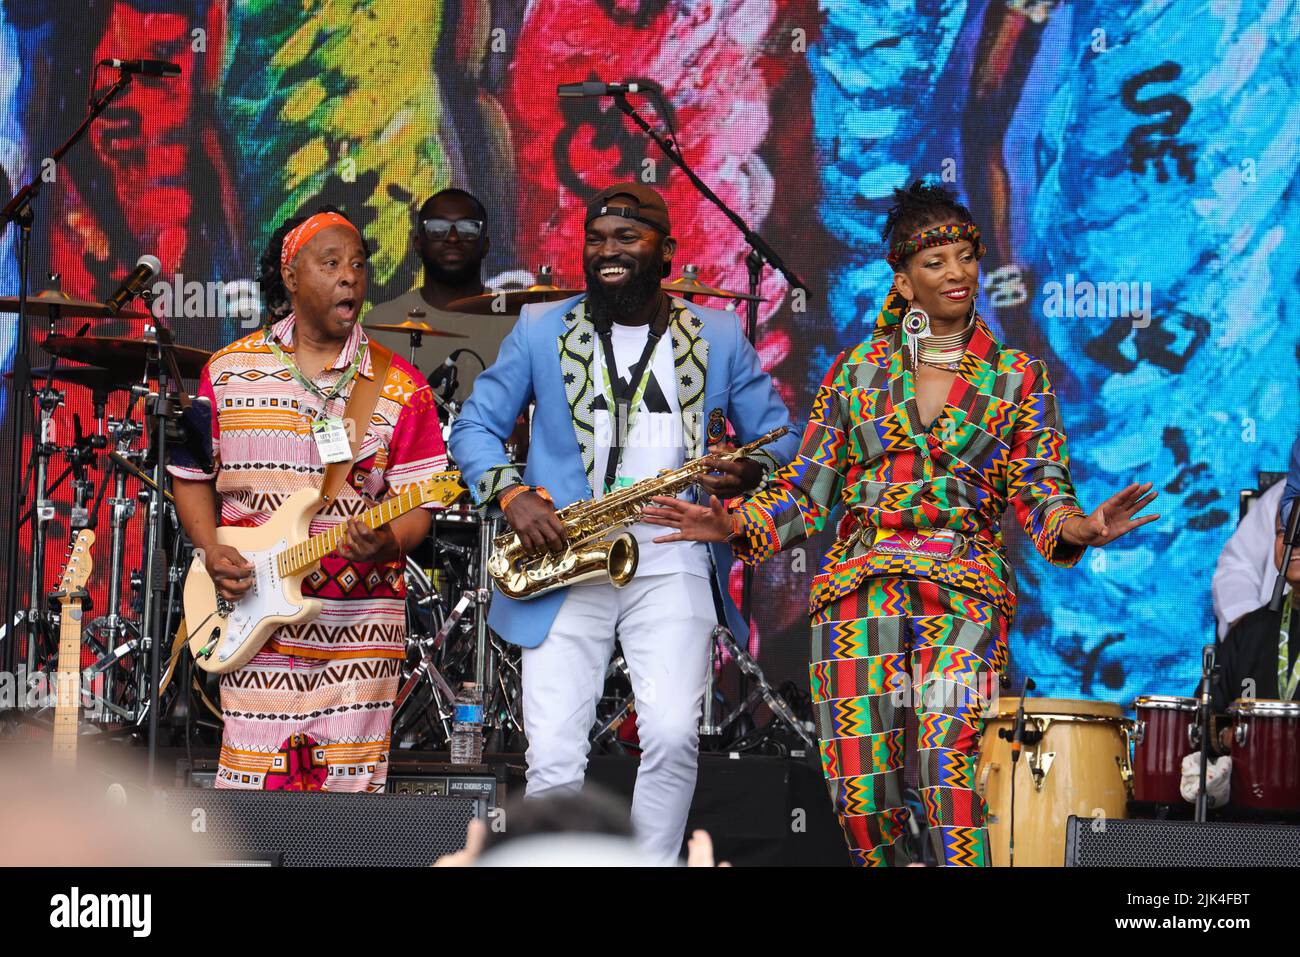 Malmesbury, Wiltshire, UK. 30th July 2022, Womad Festival, Charlton Park, Malmesbury, Wiltshire. Ghana and UK Afro-Rock creators Osibisa perform on the Open Air Stage.  The WOMAD Festival held its first event in 1982 at the Bath and West Showground in Shepton Mallet, Somerset. Over the intervening 40 years, the Peter Gabriel fronted organisation has hosted festivals across the globe, from Spain to New Zealand, Chile to Abu Dhabi. For the 40th anniversary its flagship UK festival is held this weekend from 28-30 July at Charlton Park. WOMAD - World of Music, Arts and Dance. Credit: Casper Farrel Stock Photo